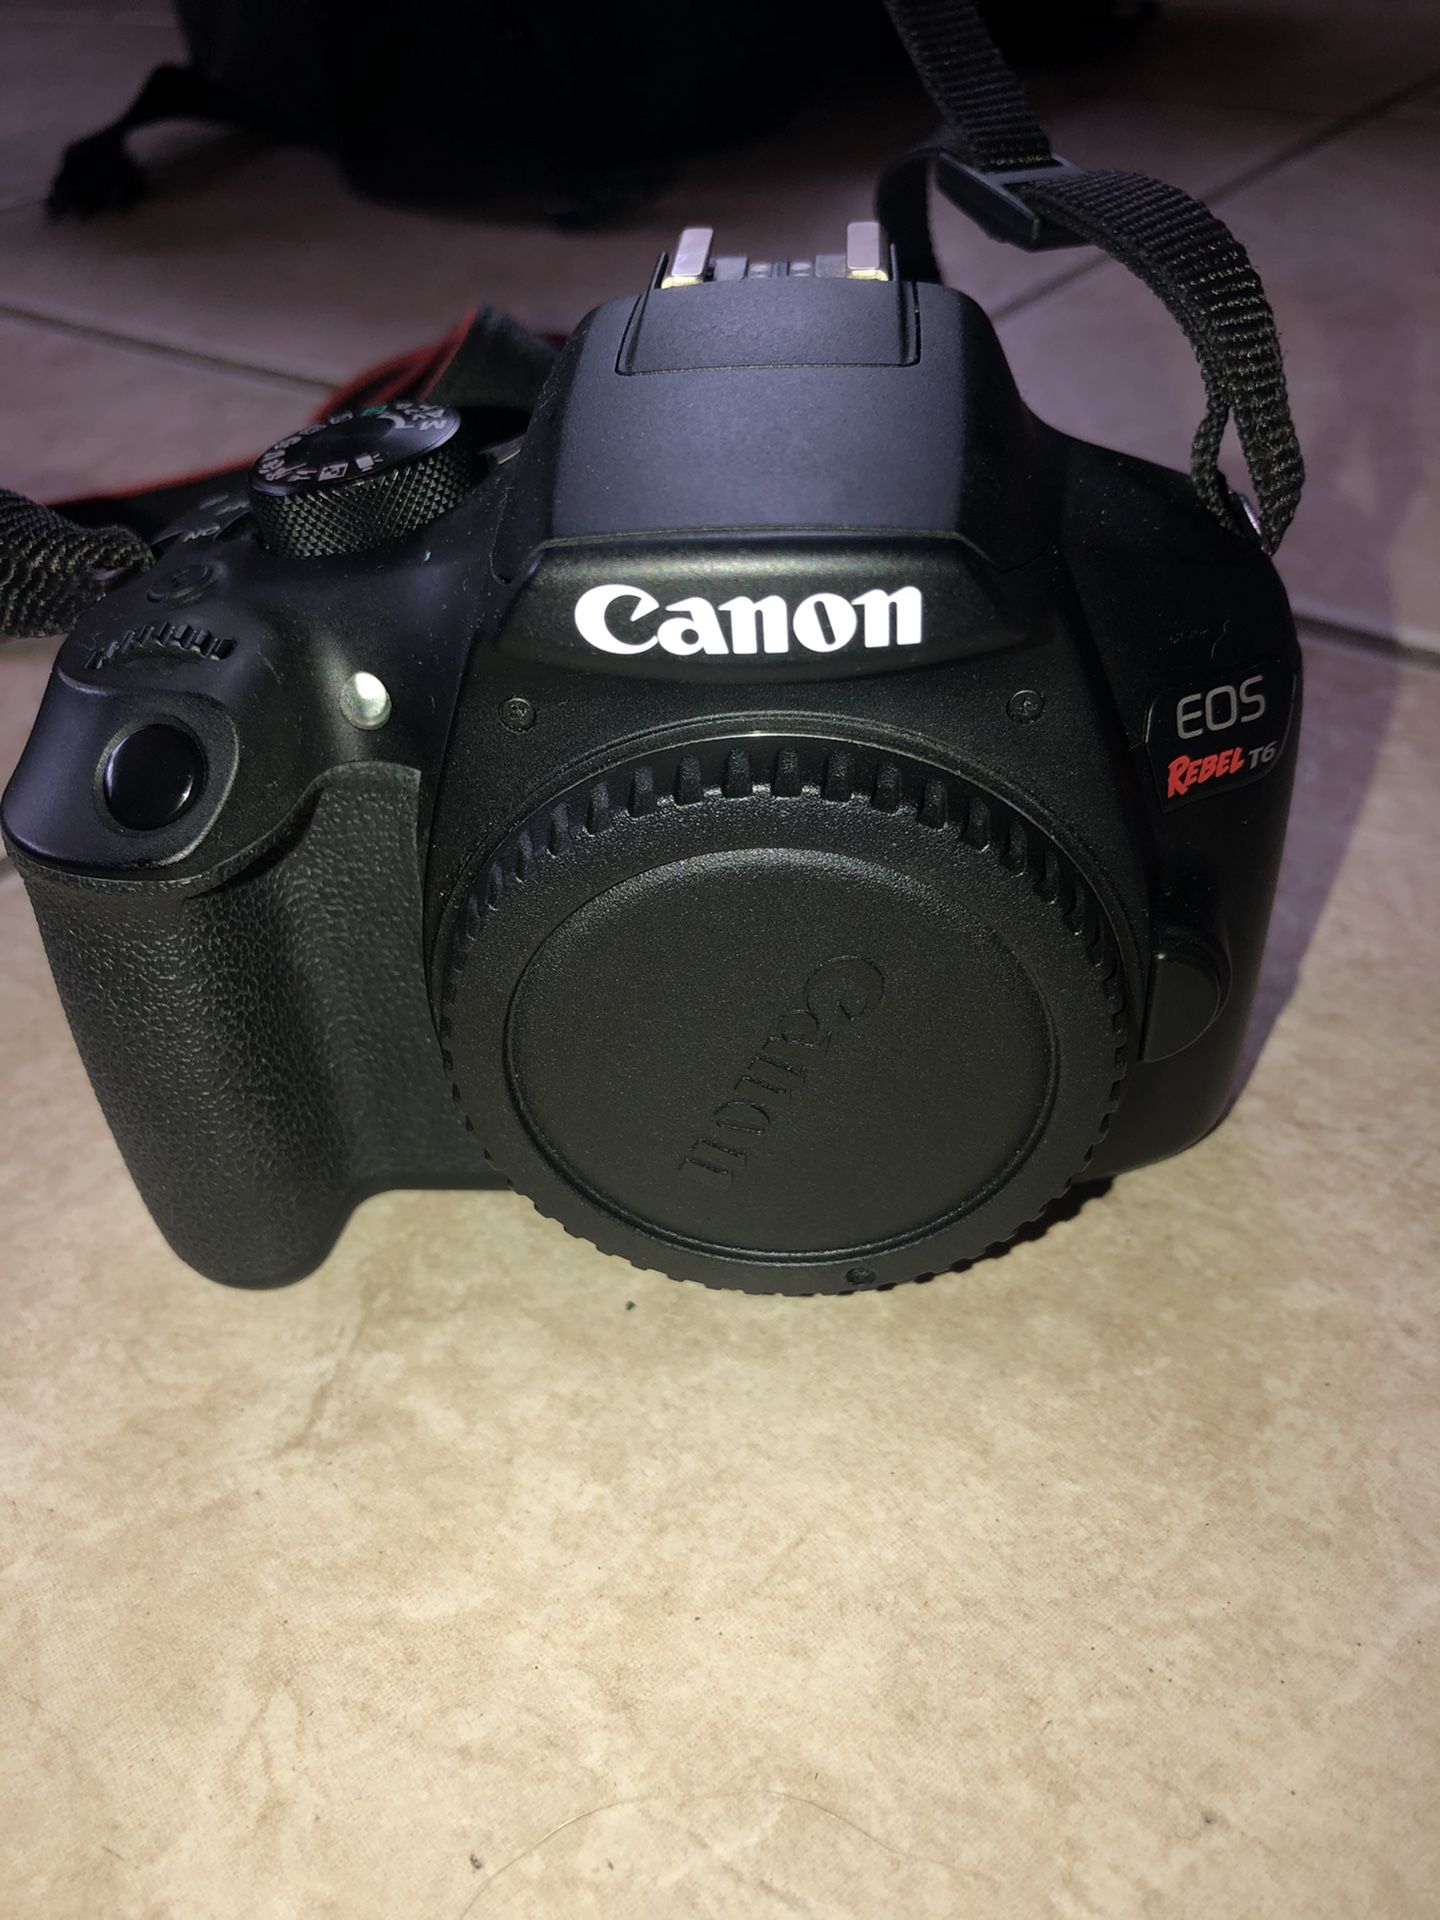 Canon Rebel T6 body, 18-35mm lens, 3 batteries and charger, case perfect starter kit or second camera